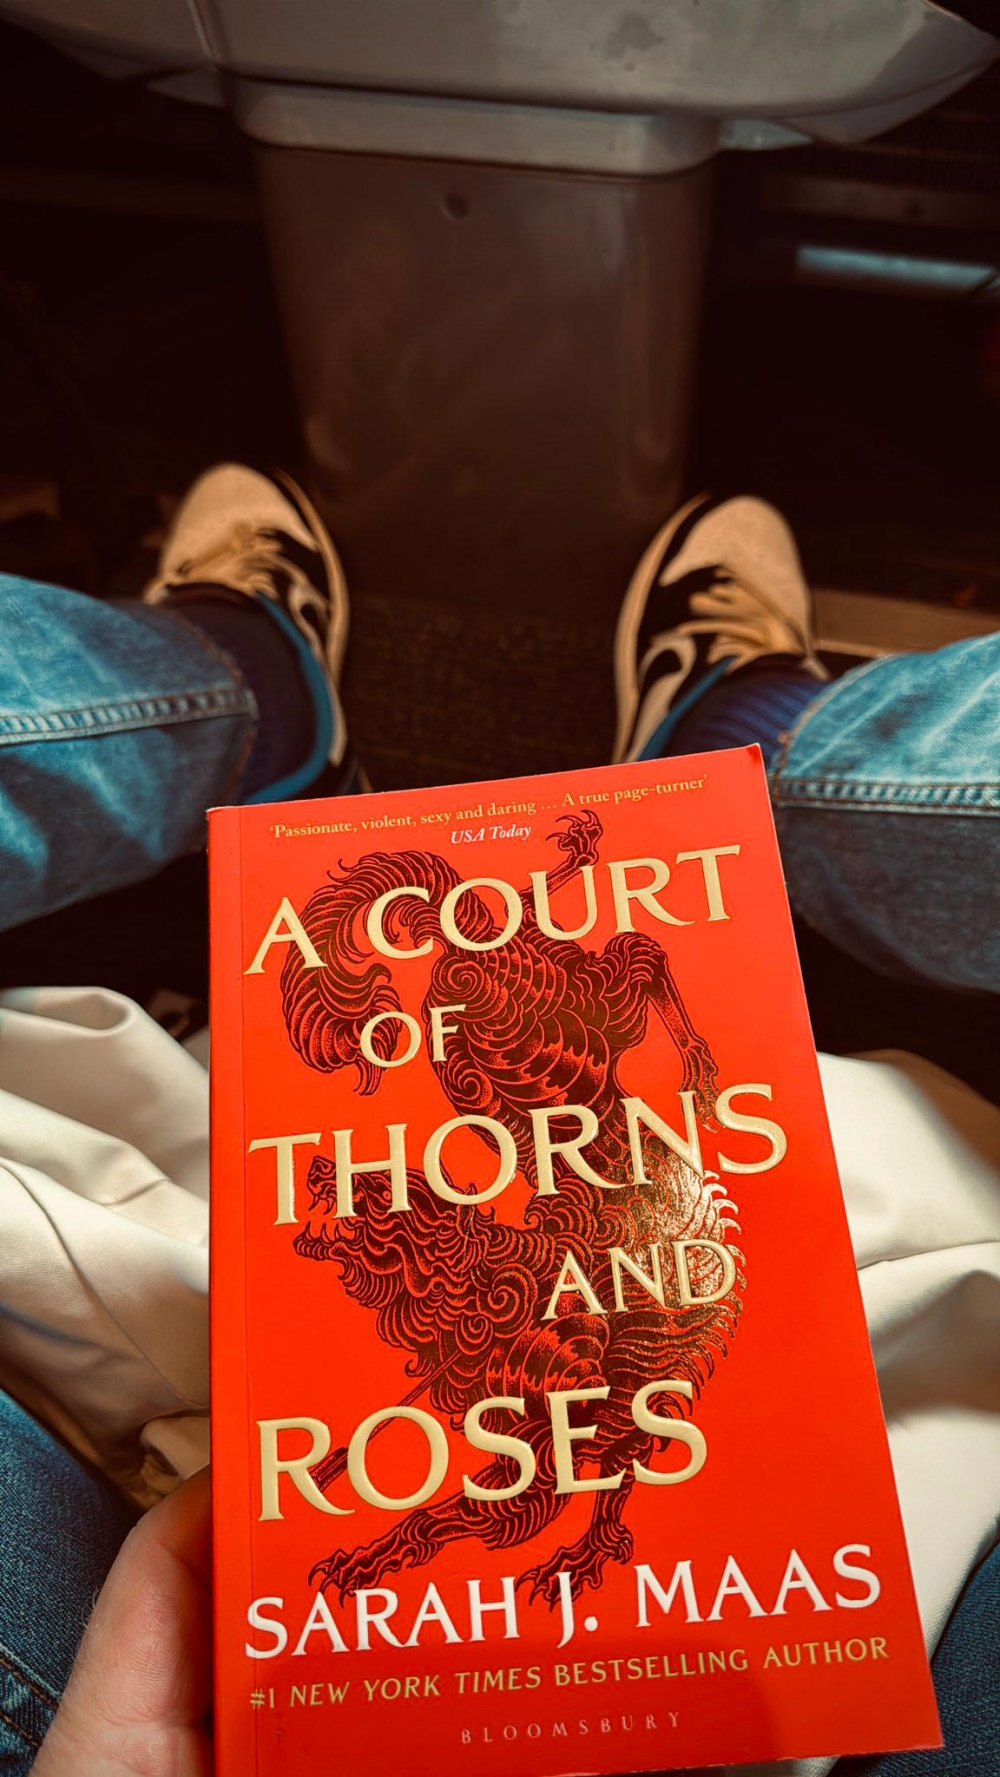 The Internet Is Obsessed With J.J. Watt Reading and Recapping 'A Court of Thorns and Roses'